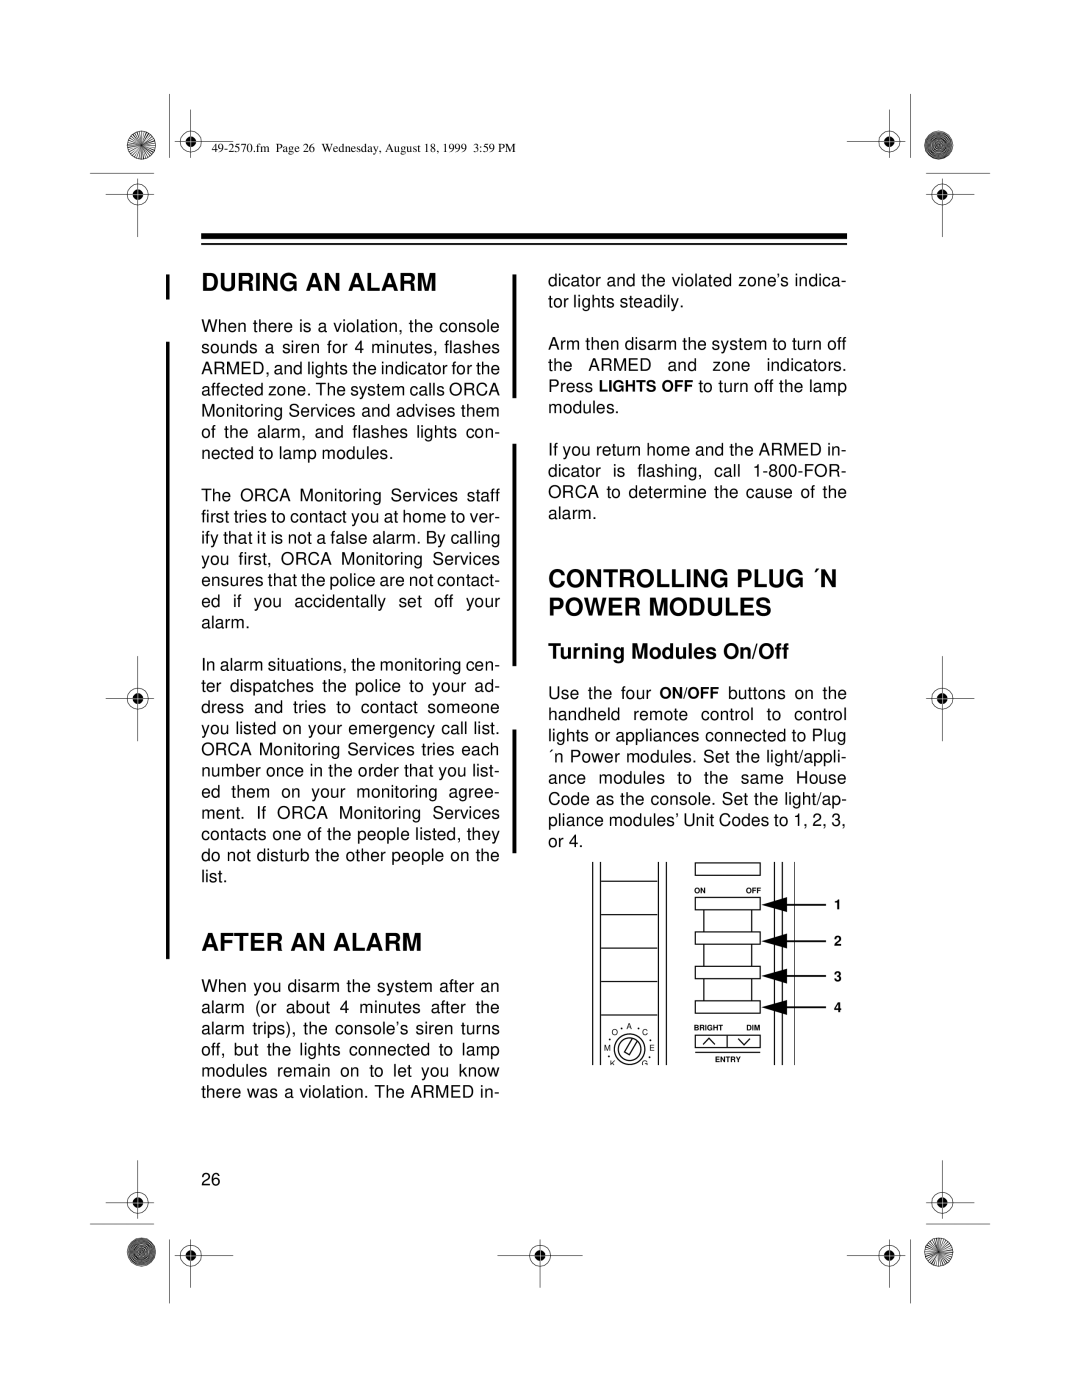 Radio Shack 49-2570 owner manual During An Alarm, After An Alarm, Controlling Plug ´N Power Modules, Turning Modules On/Off 